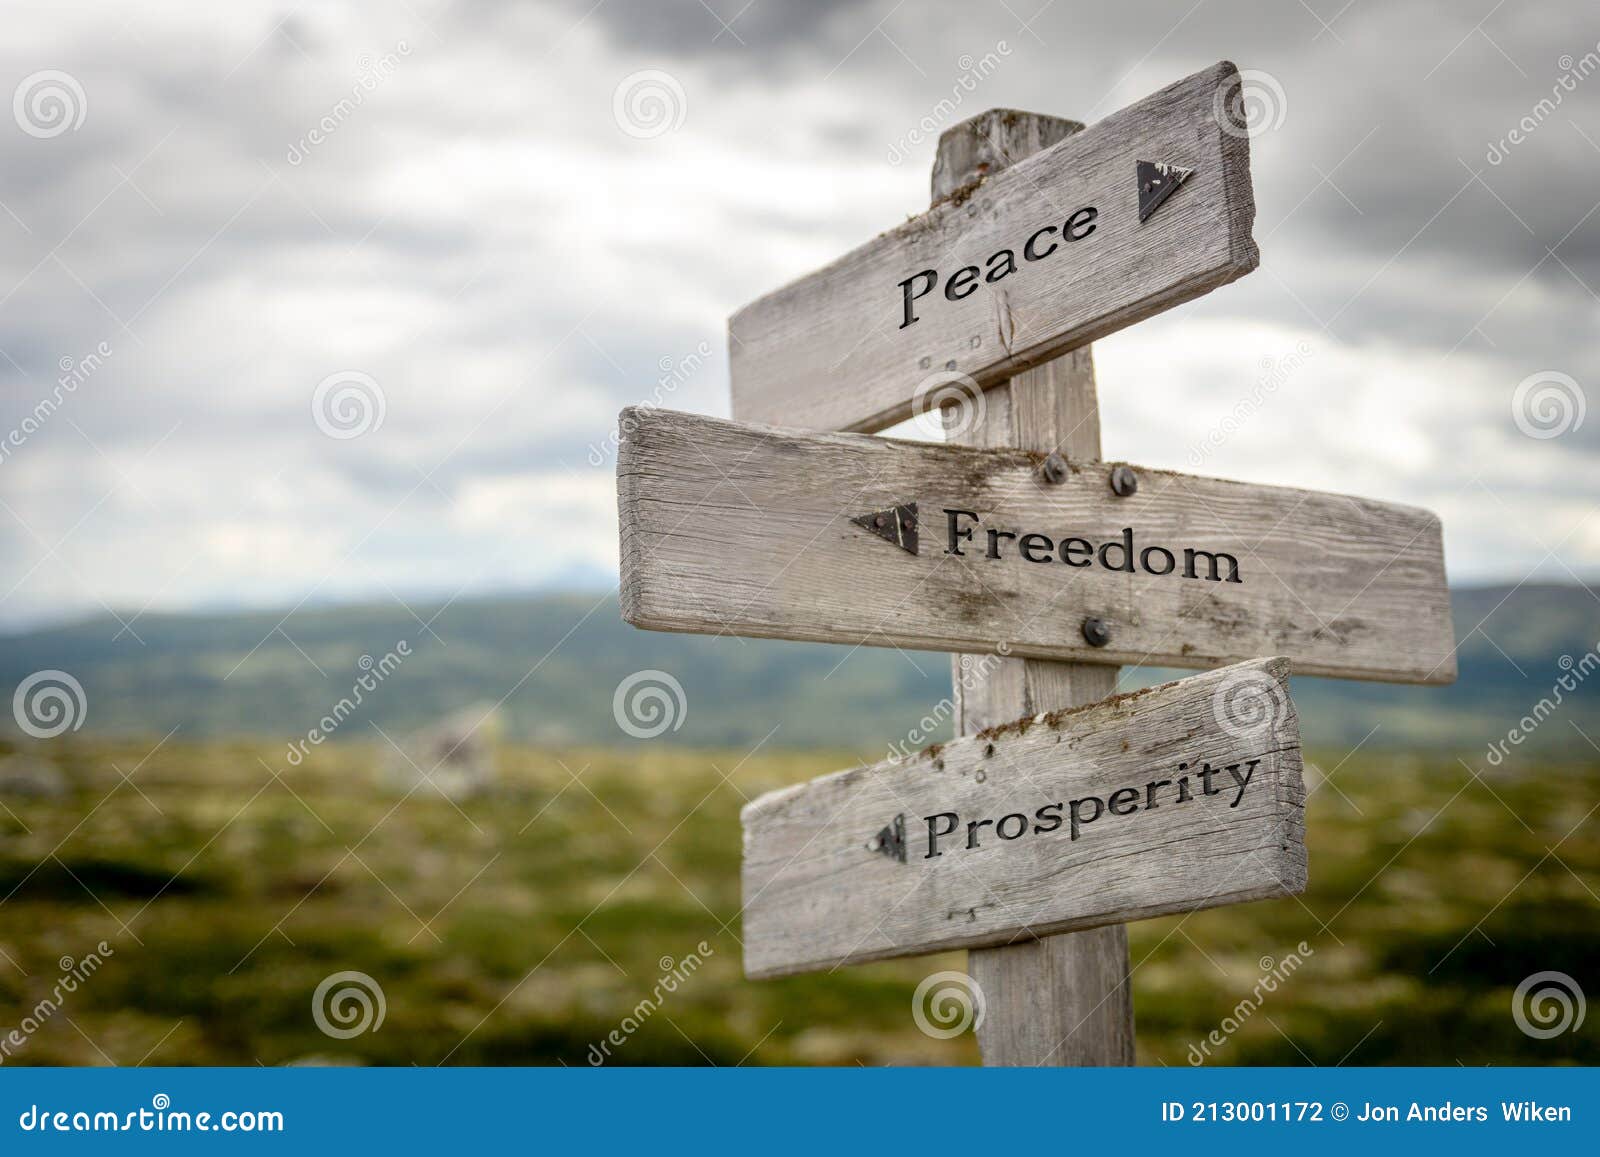 peace freedom prosperity text on wooden signpost